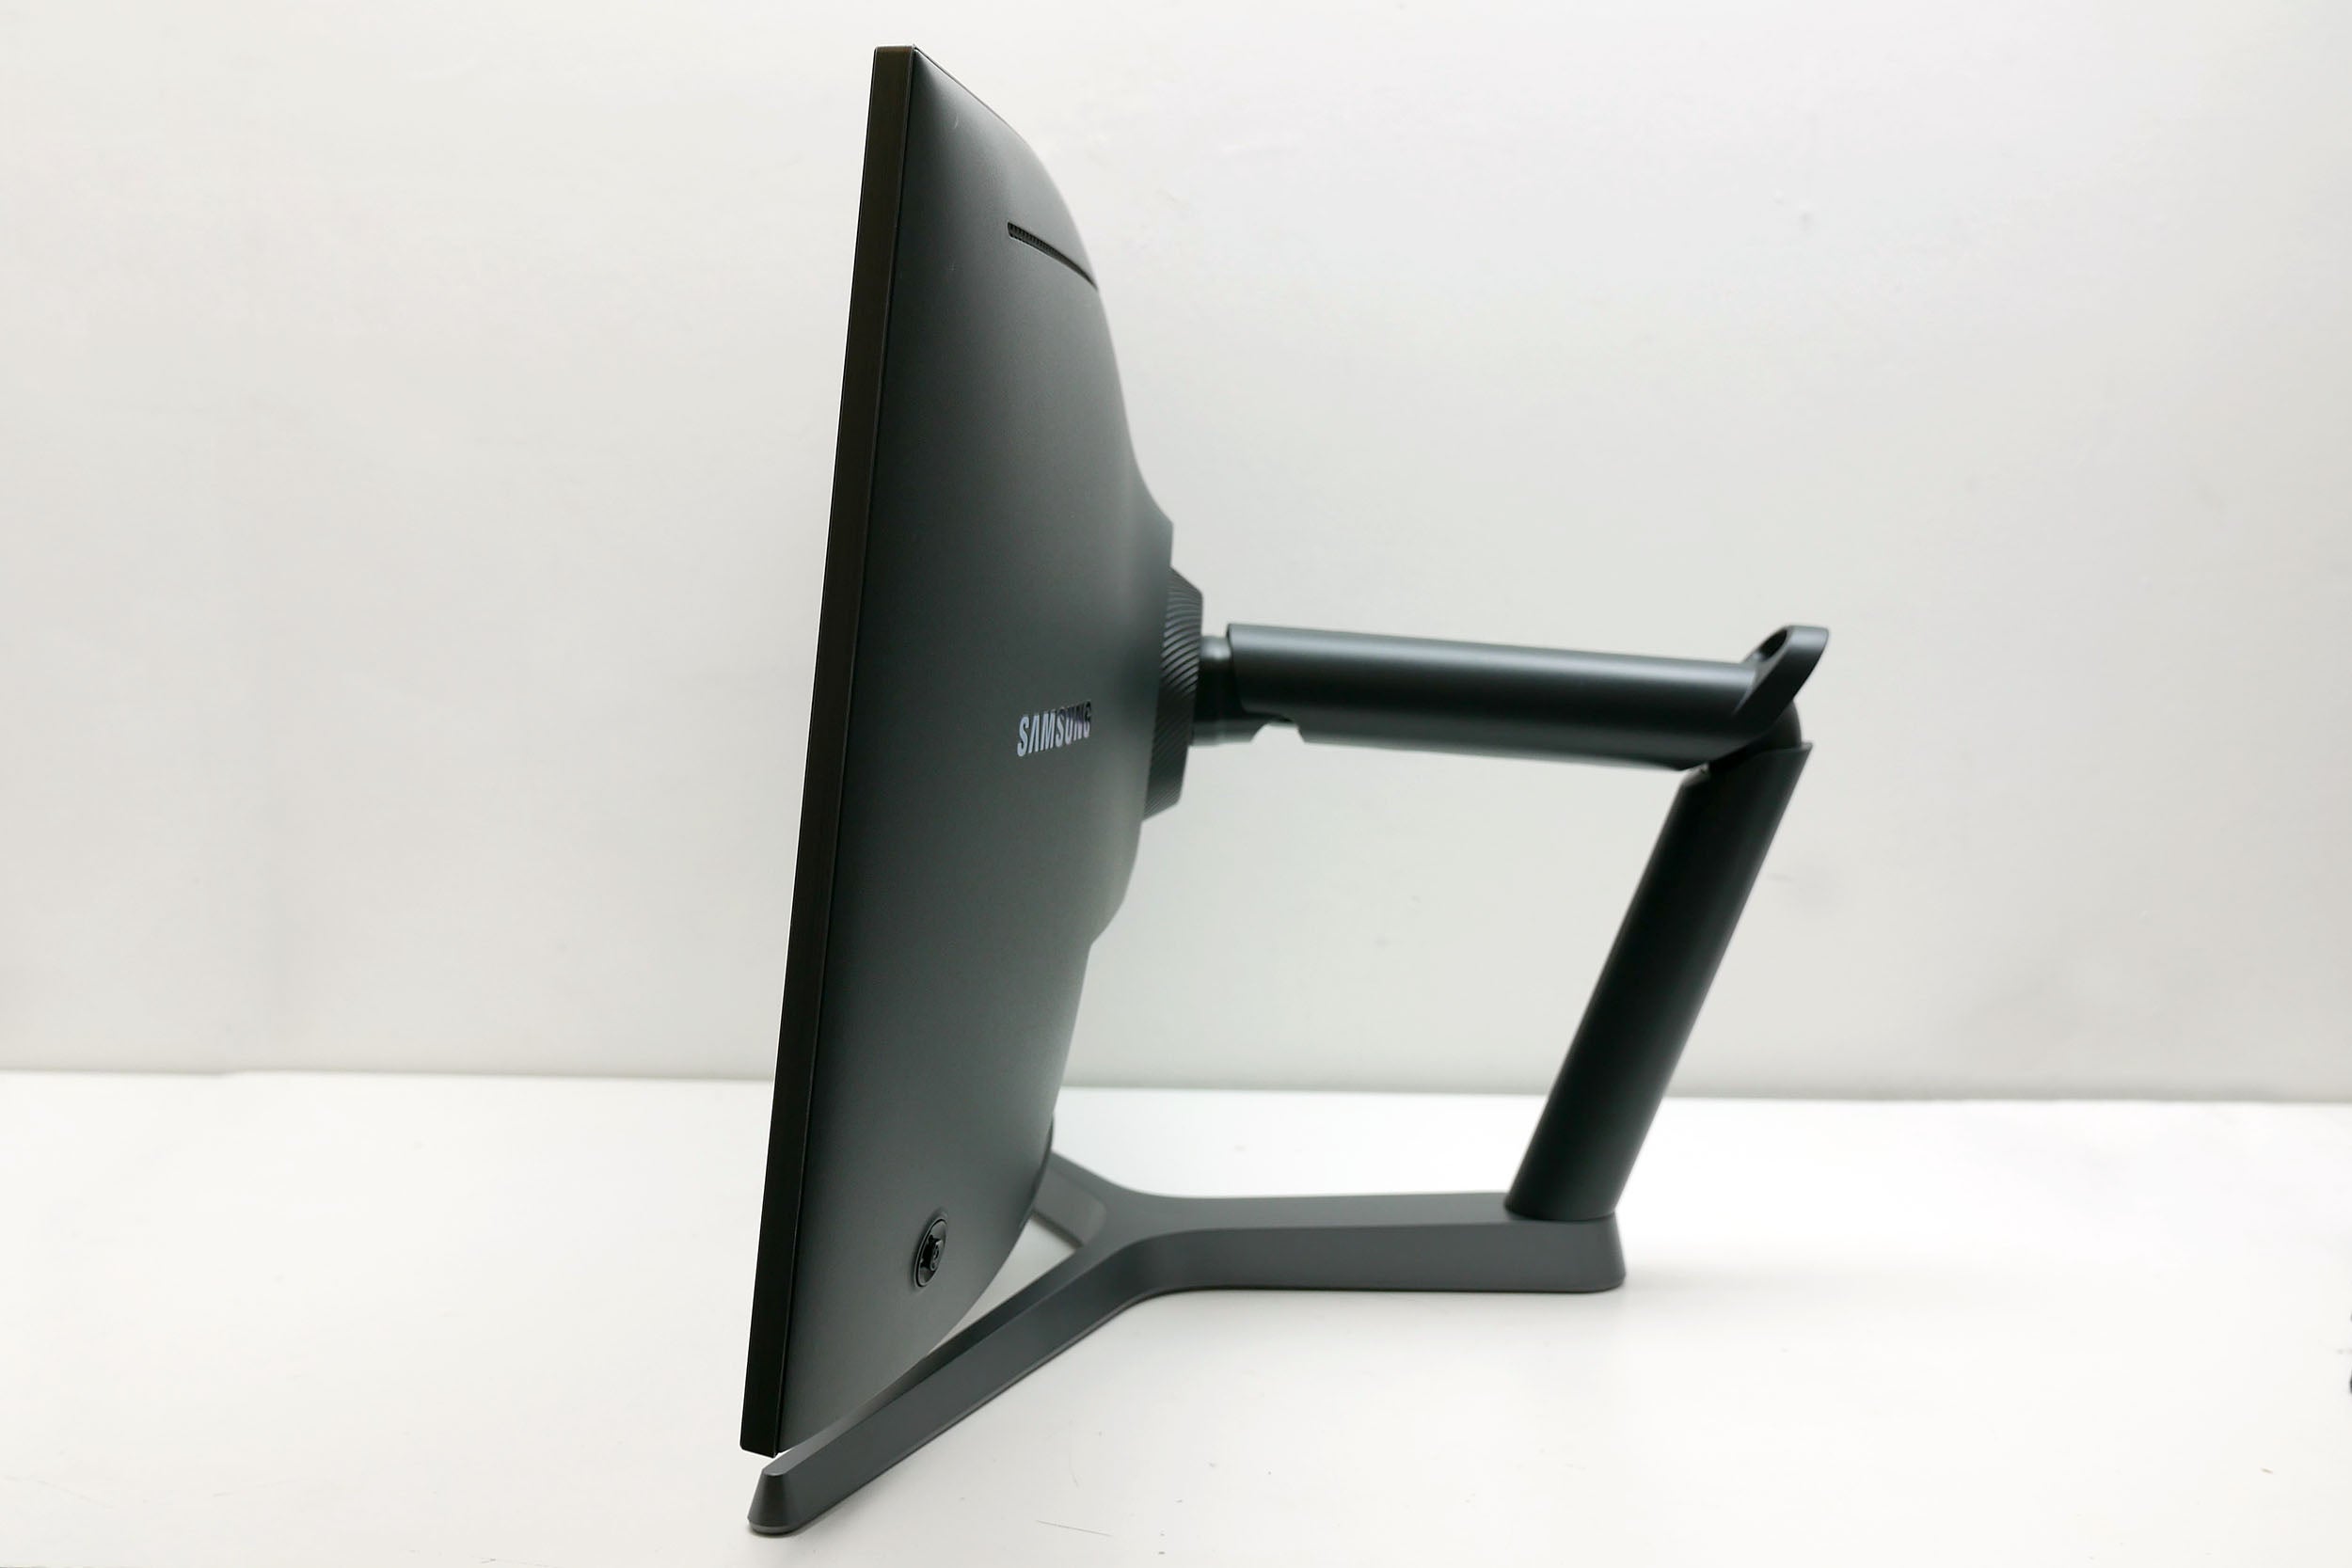 Side view of Samsung CHG70 gaming monitor on stand.